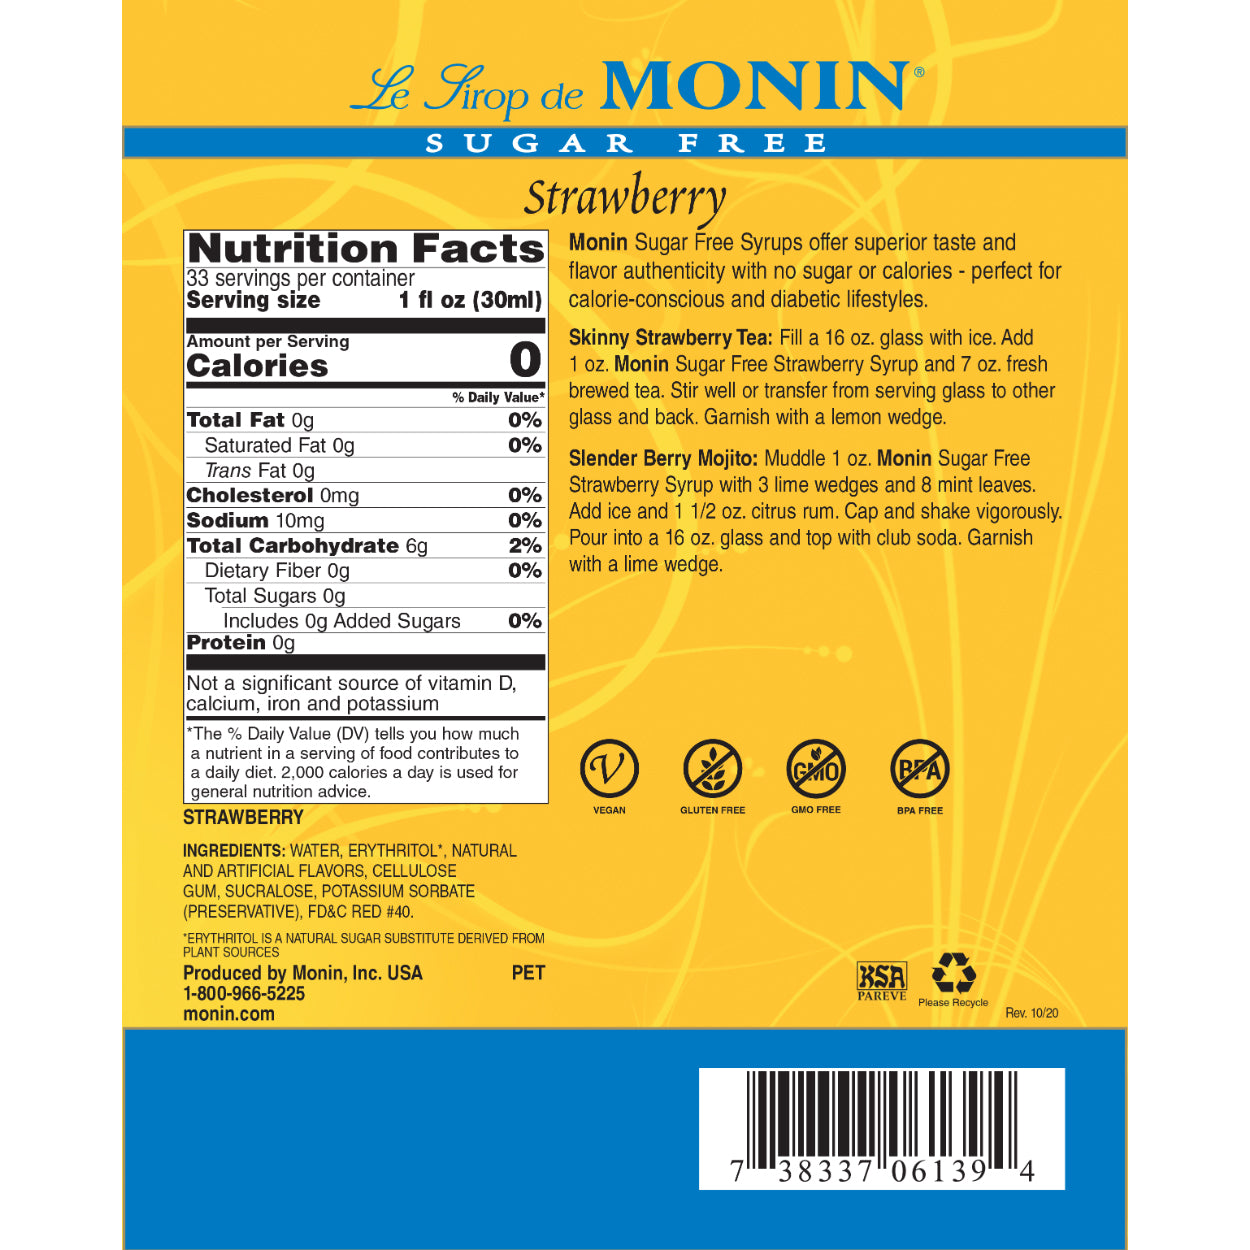 Monin Sugar Free Strawberry Syrup nutrition facts and recipe label